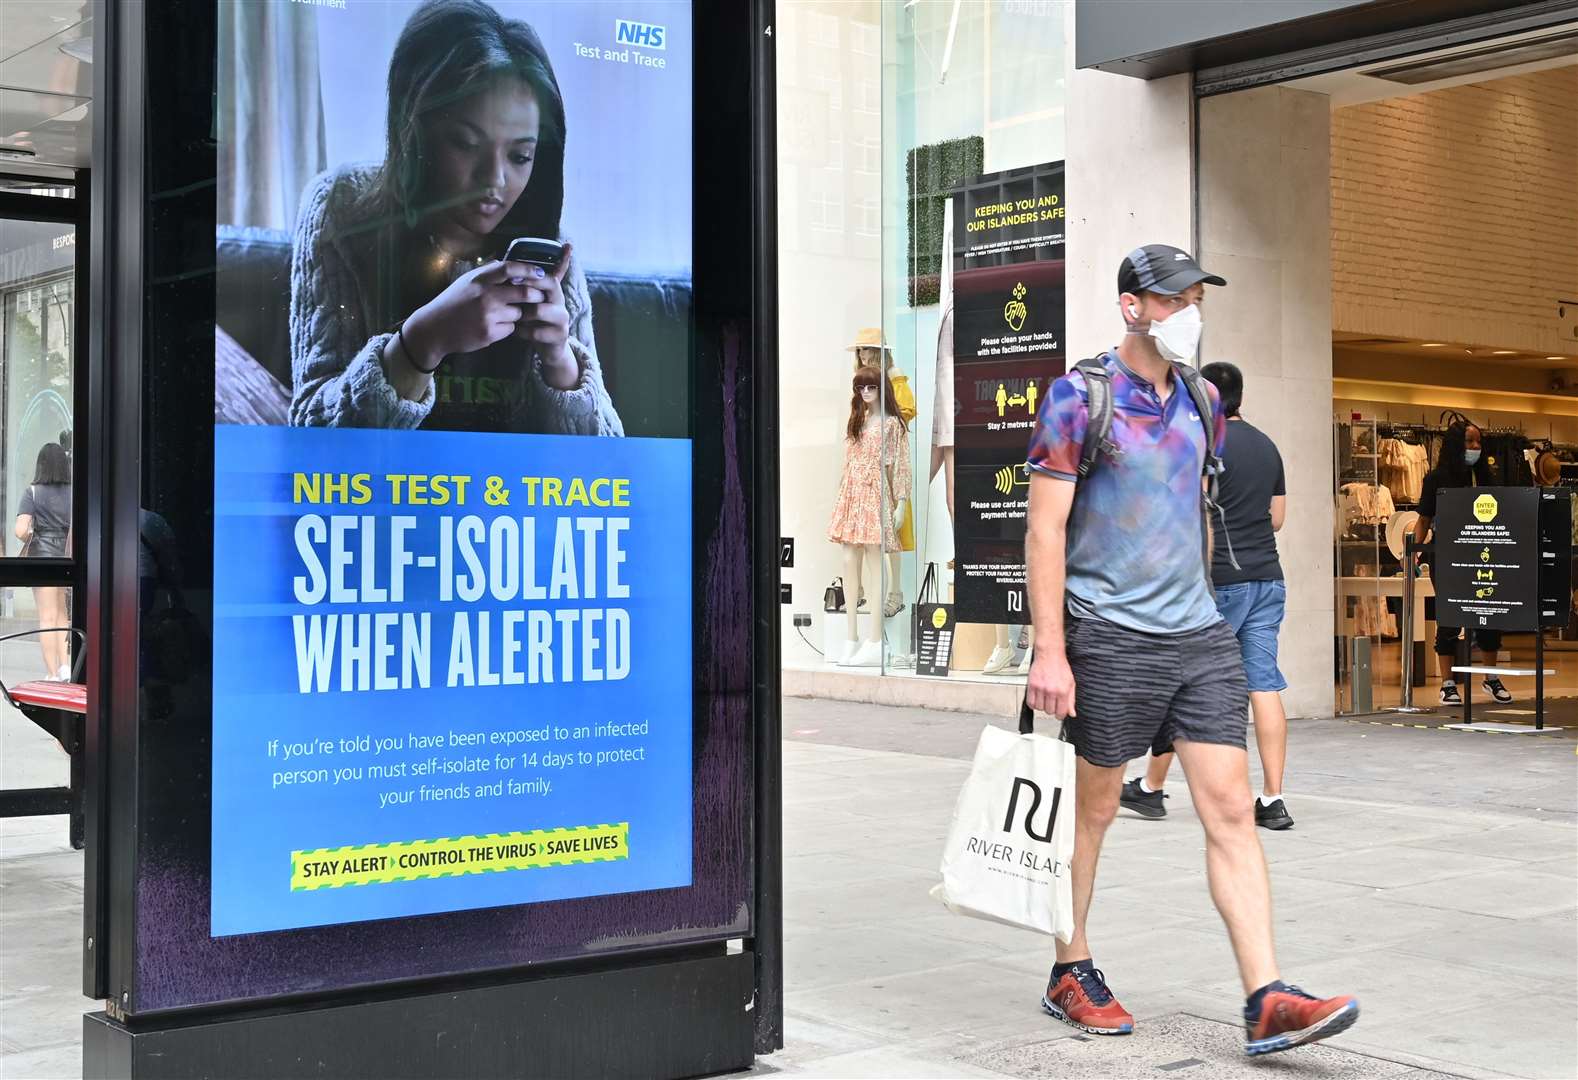 IMPORTANT MESSAGE: The NHS Test and Trace messaging on a high street billboard